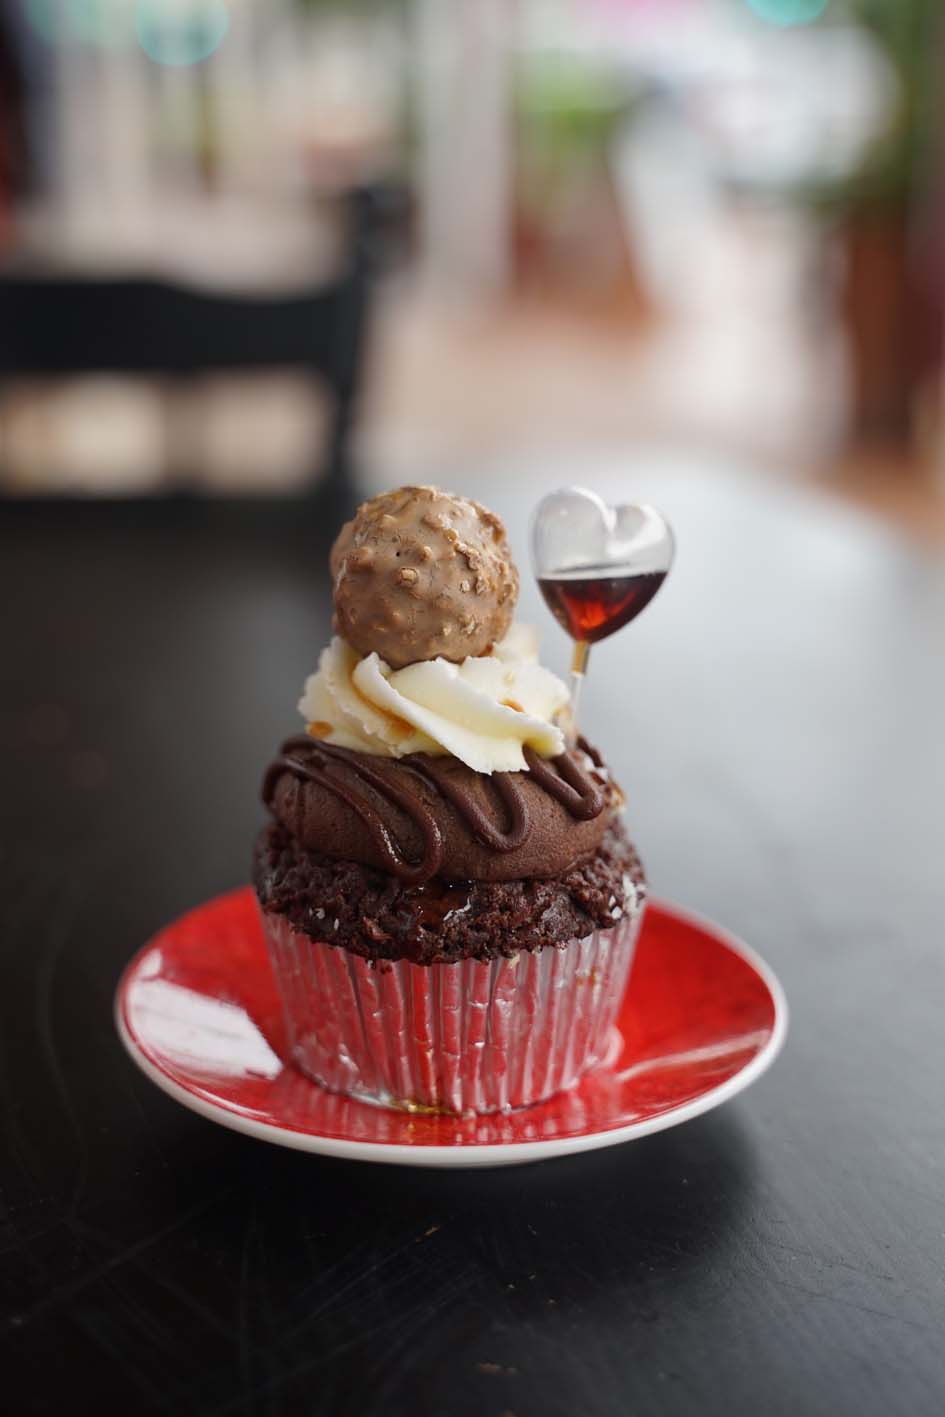 Boozy cupcakes with a pippet of your choice of alcohol are available at The Retro Diner for Flavours of Ipswich